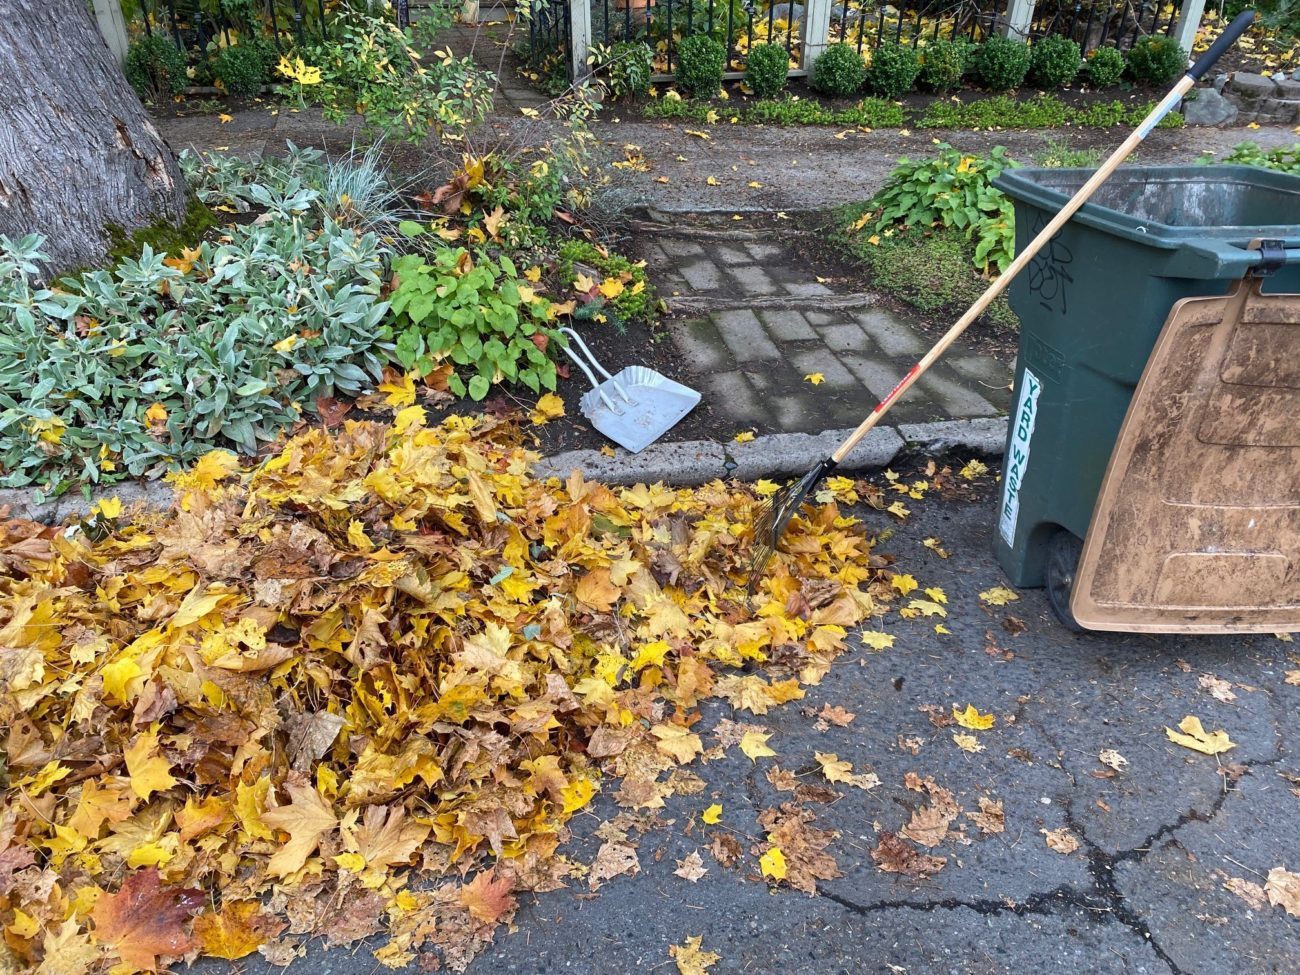 Clearing fall leaves from the sidewalk, a planting strip, and a curb area in Seattle. Photo credit: Jeanné Clark.